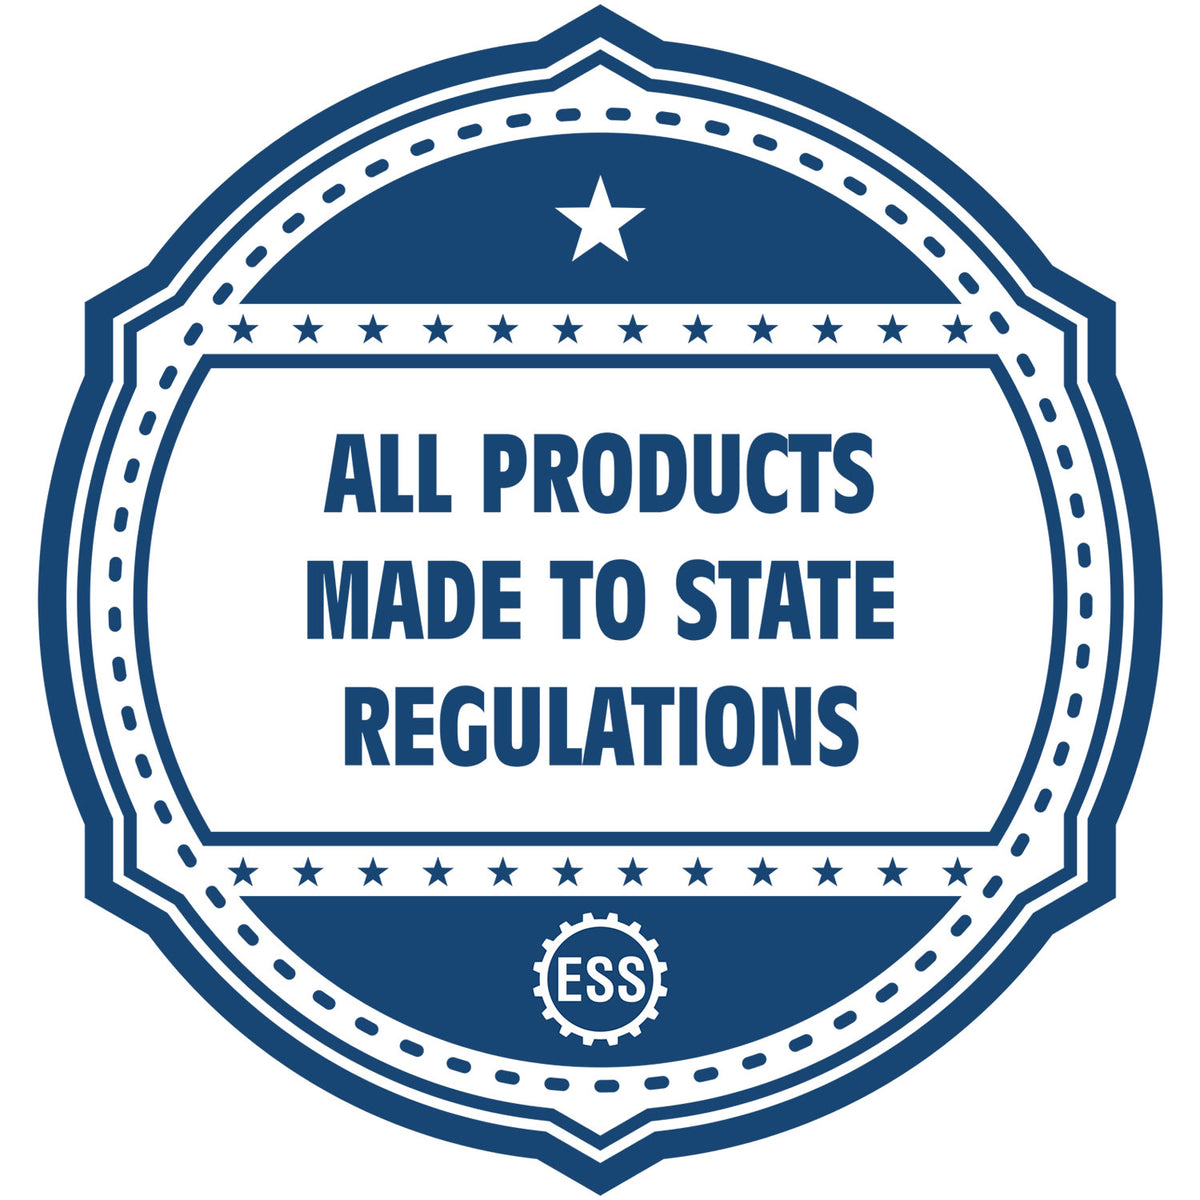 A blue icon or badge for the Self-Inking Georgia Geologist Stamp showing that this product is made in compliance with state regulations.